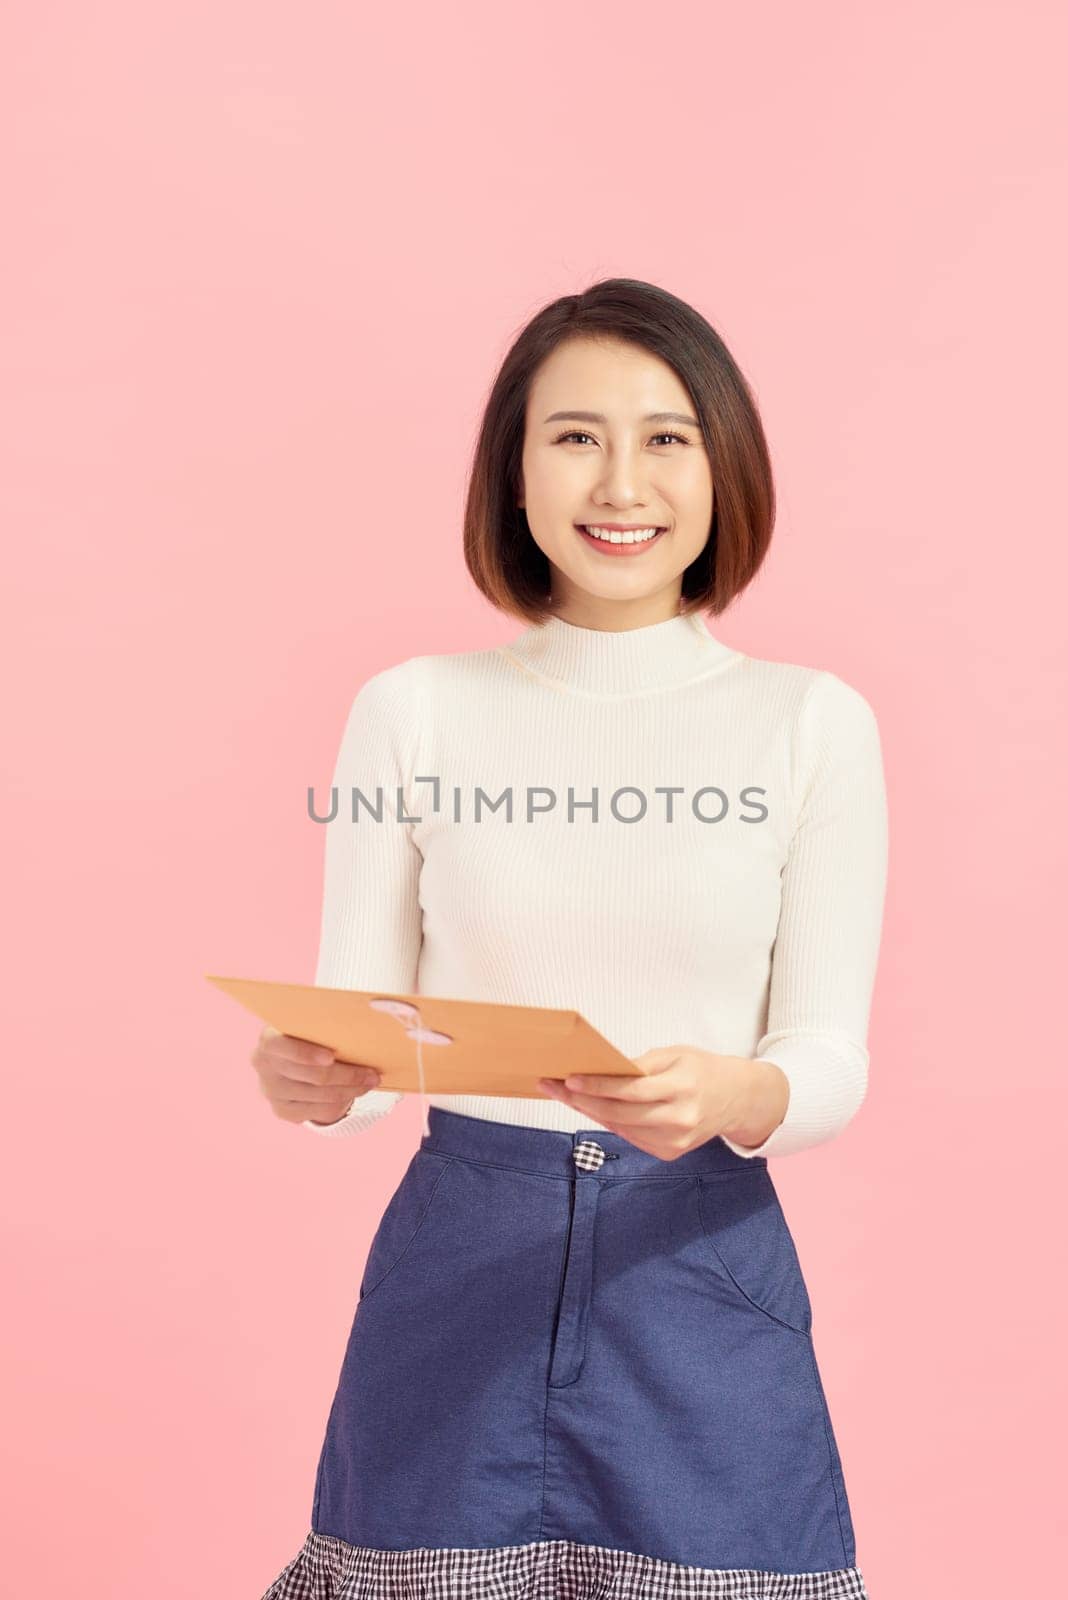 asian business woman smiling and holding document binders, pink background. by makidotvn